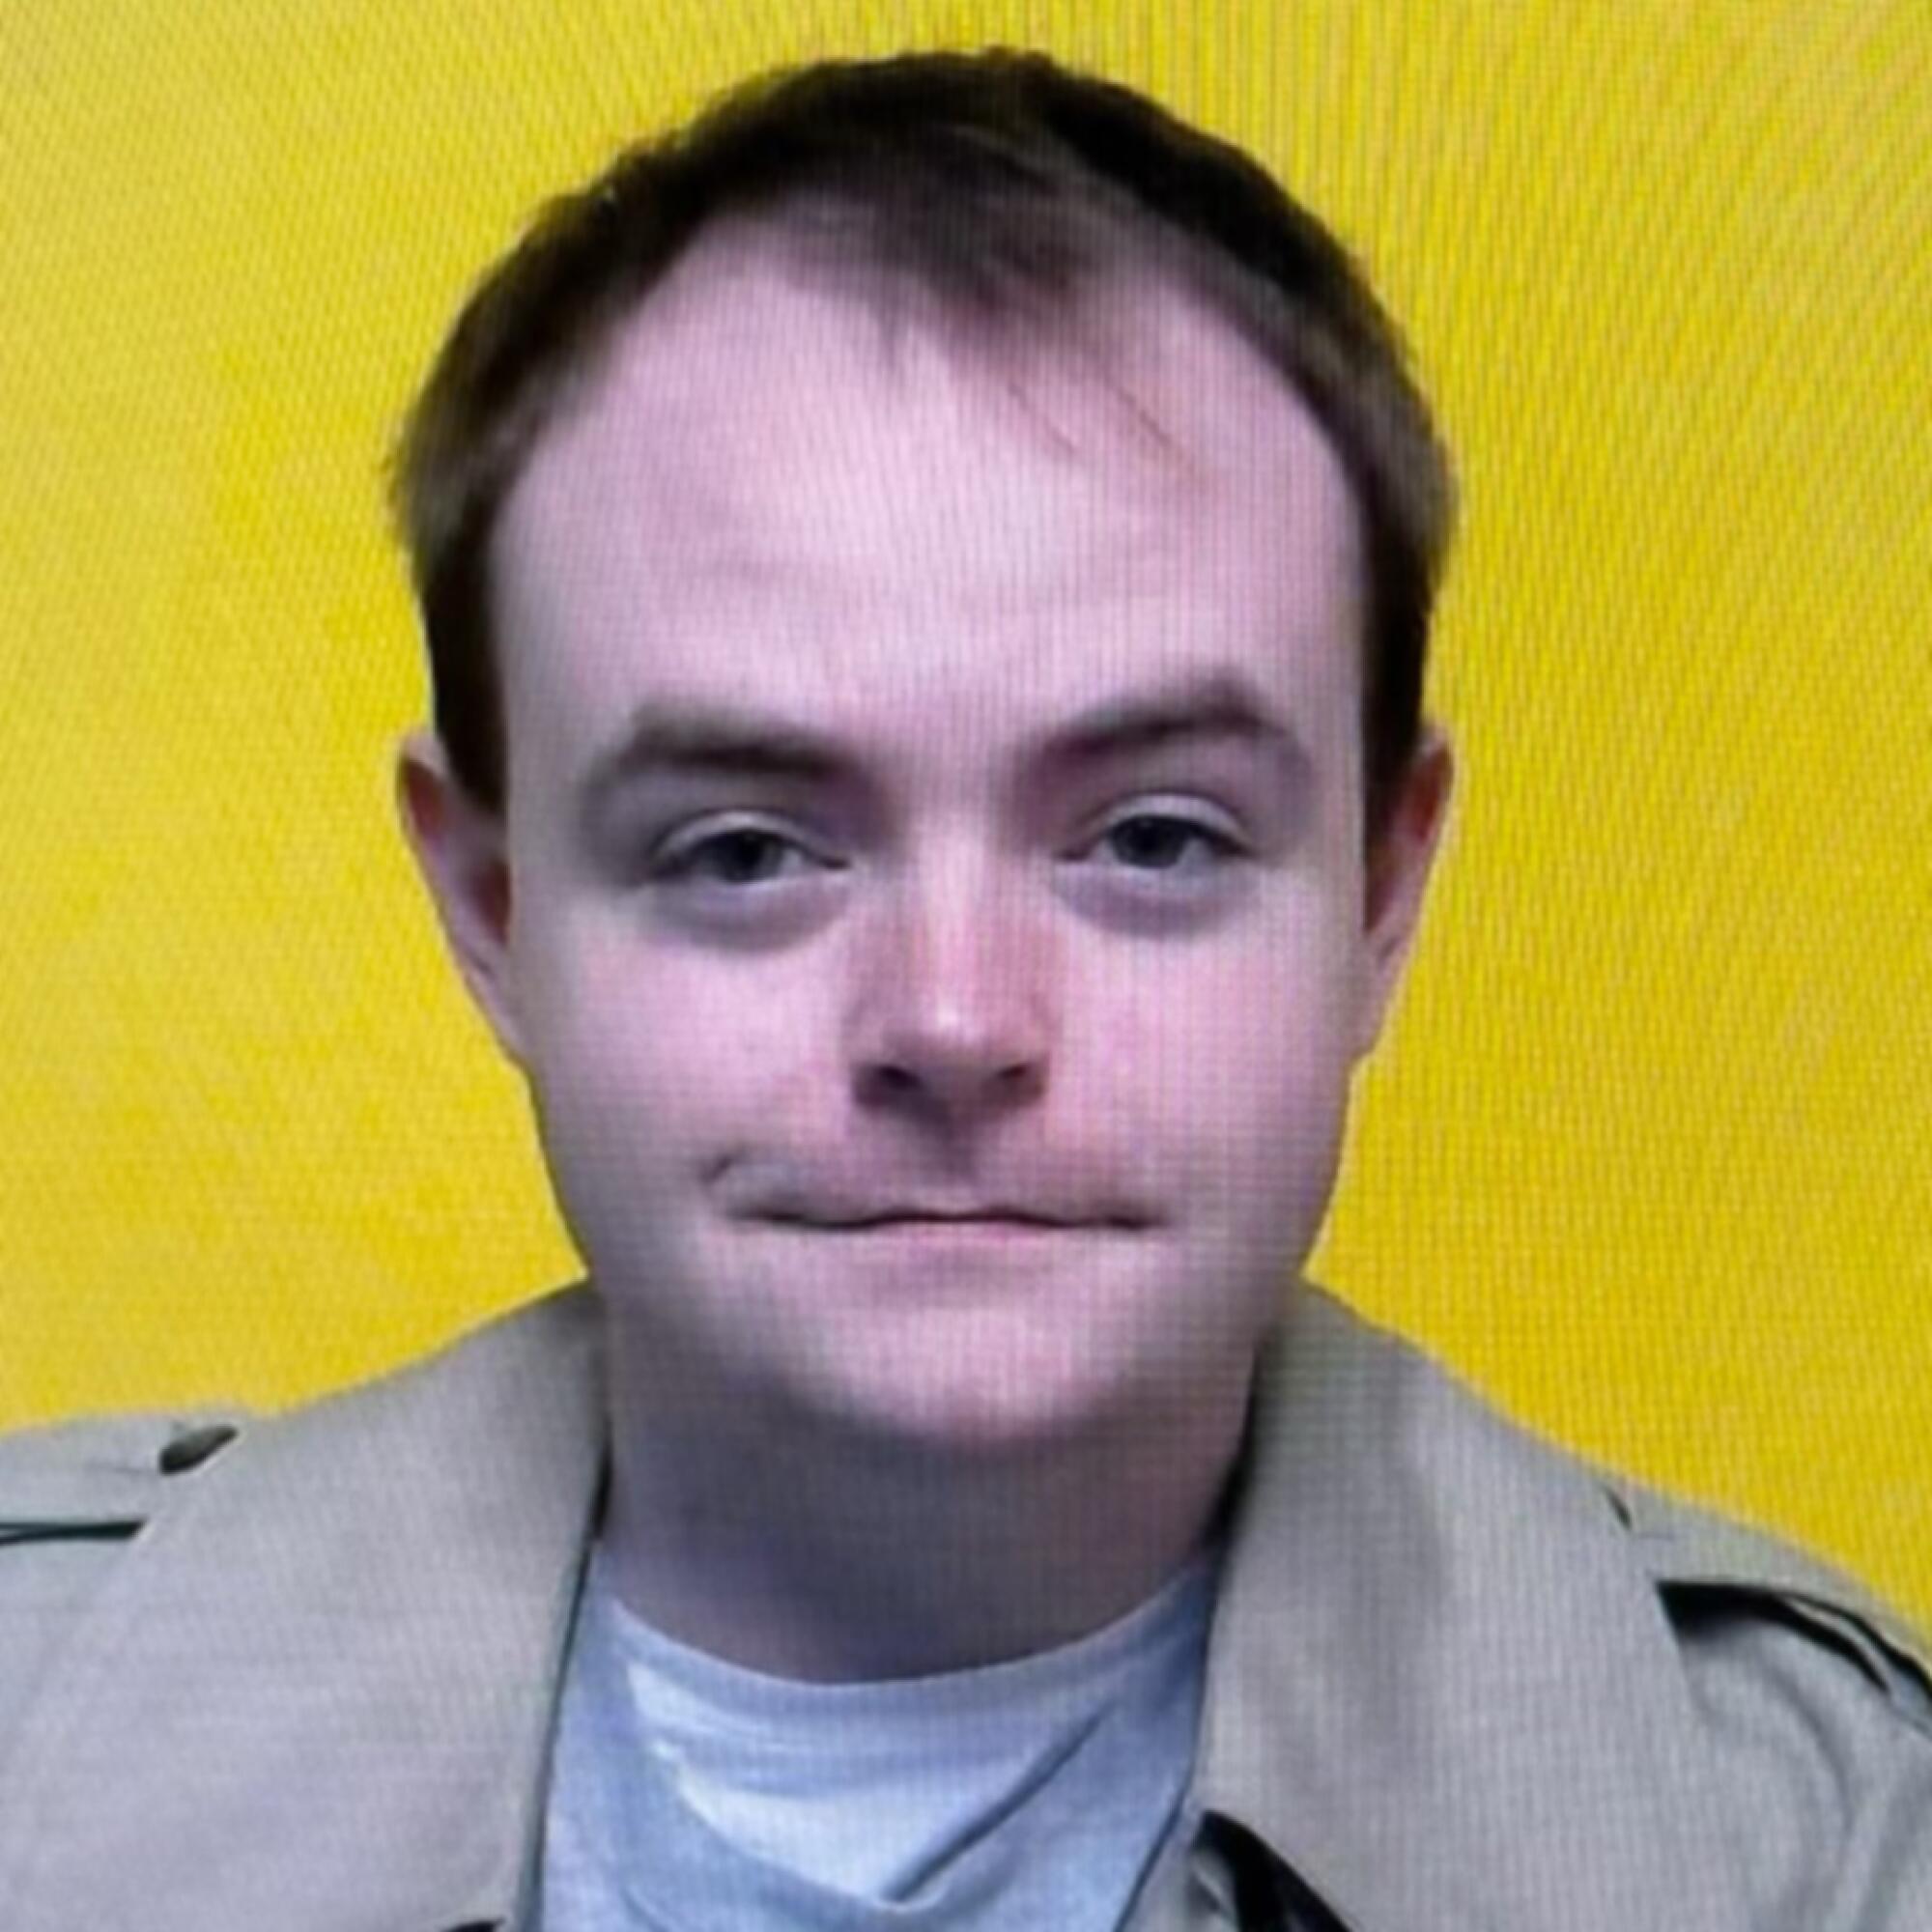 Undated handout photo of 28-year-old Austin Lee Edwards of North Chesterfield, Va.